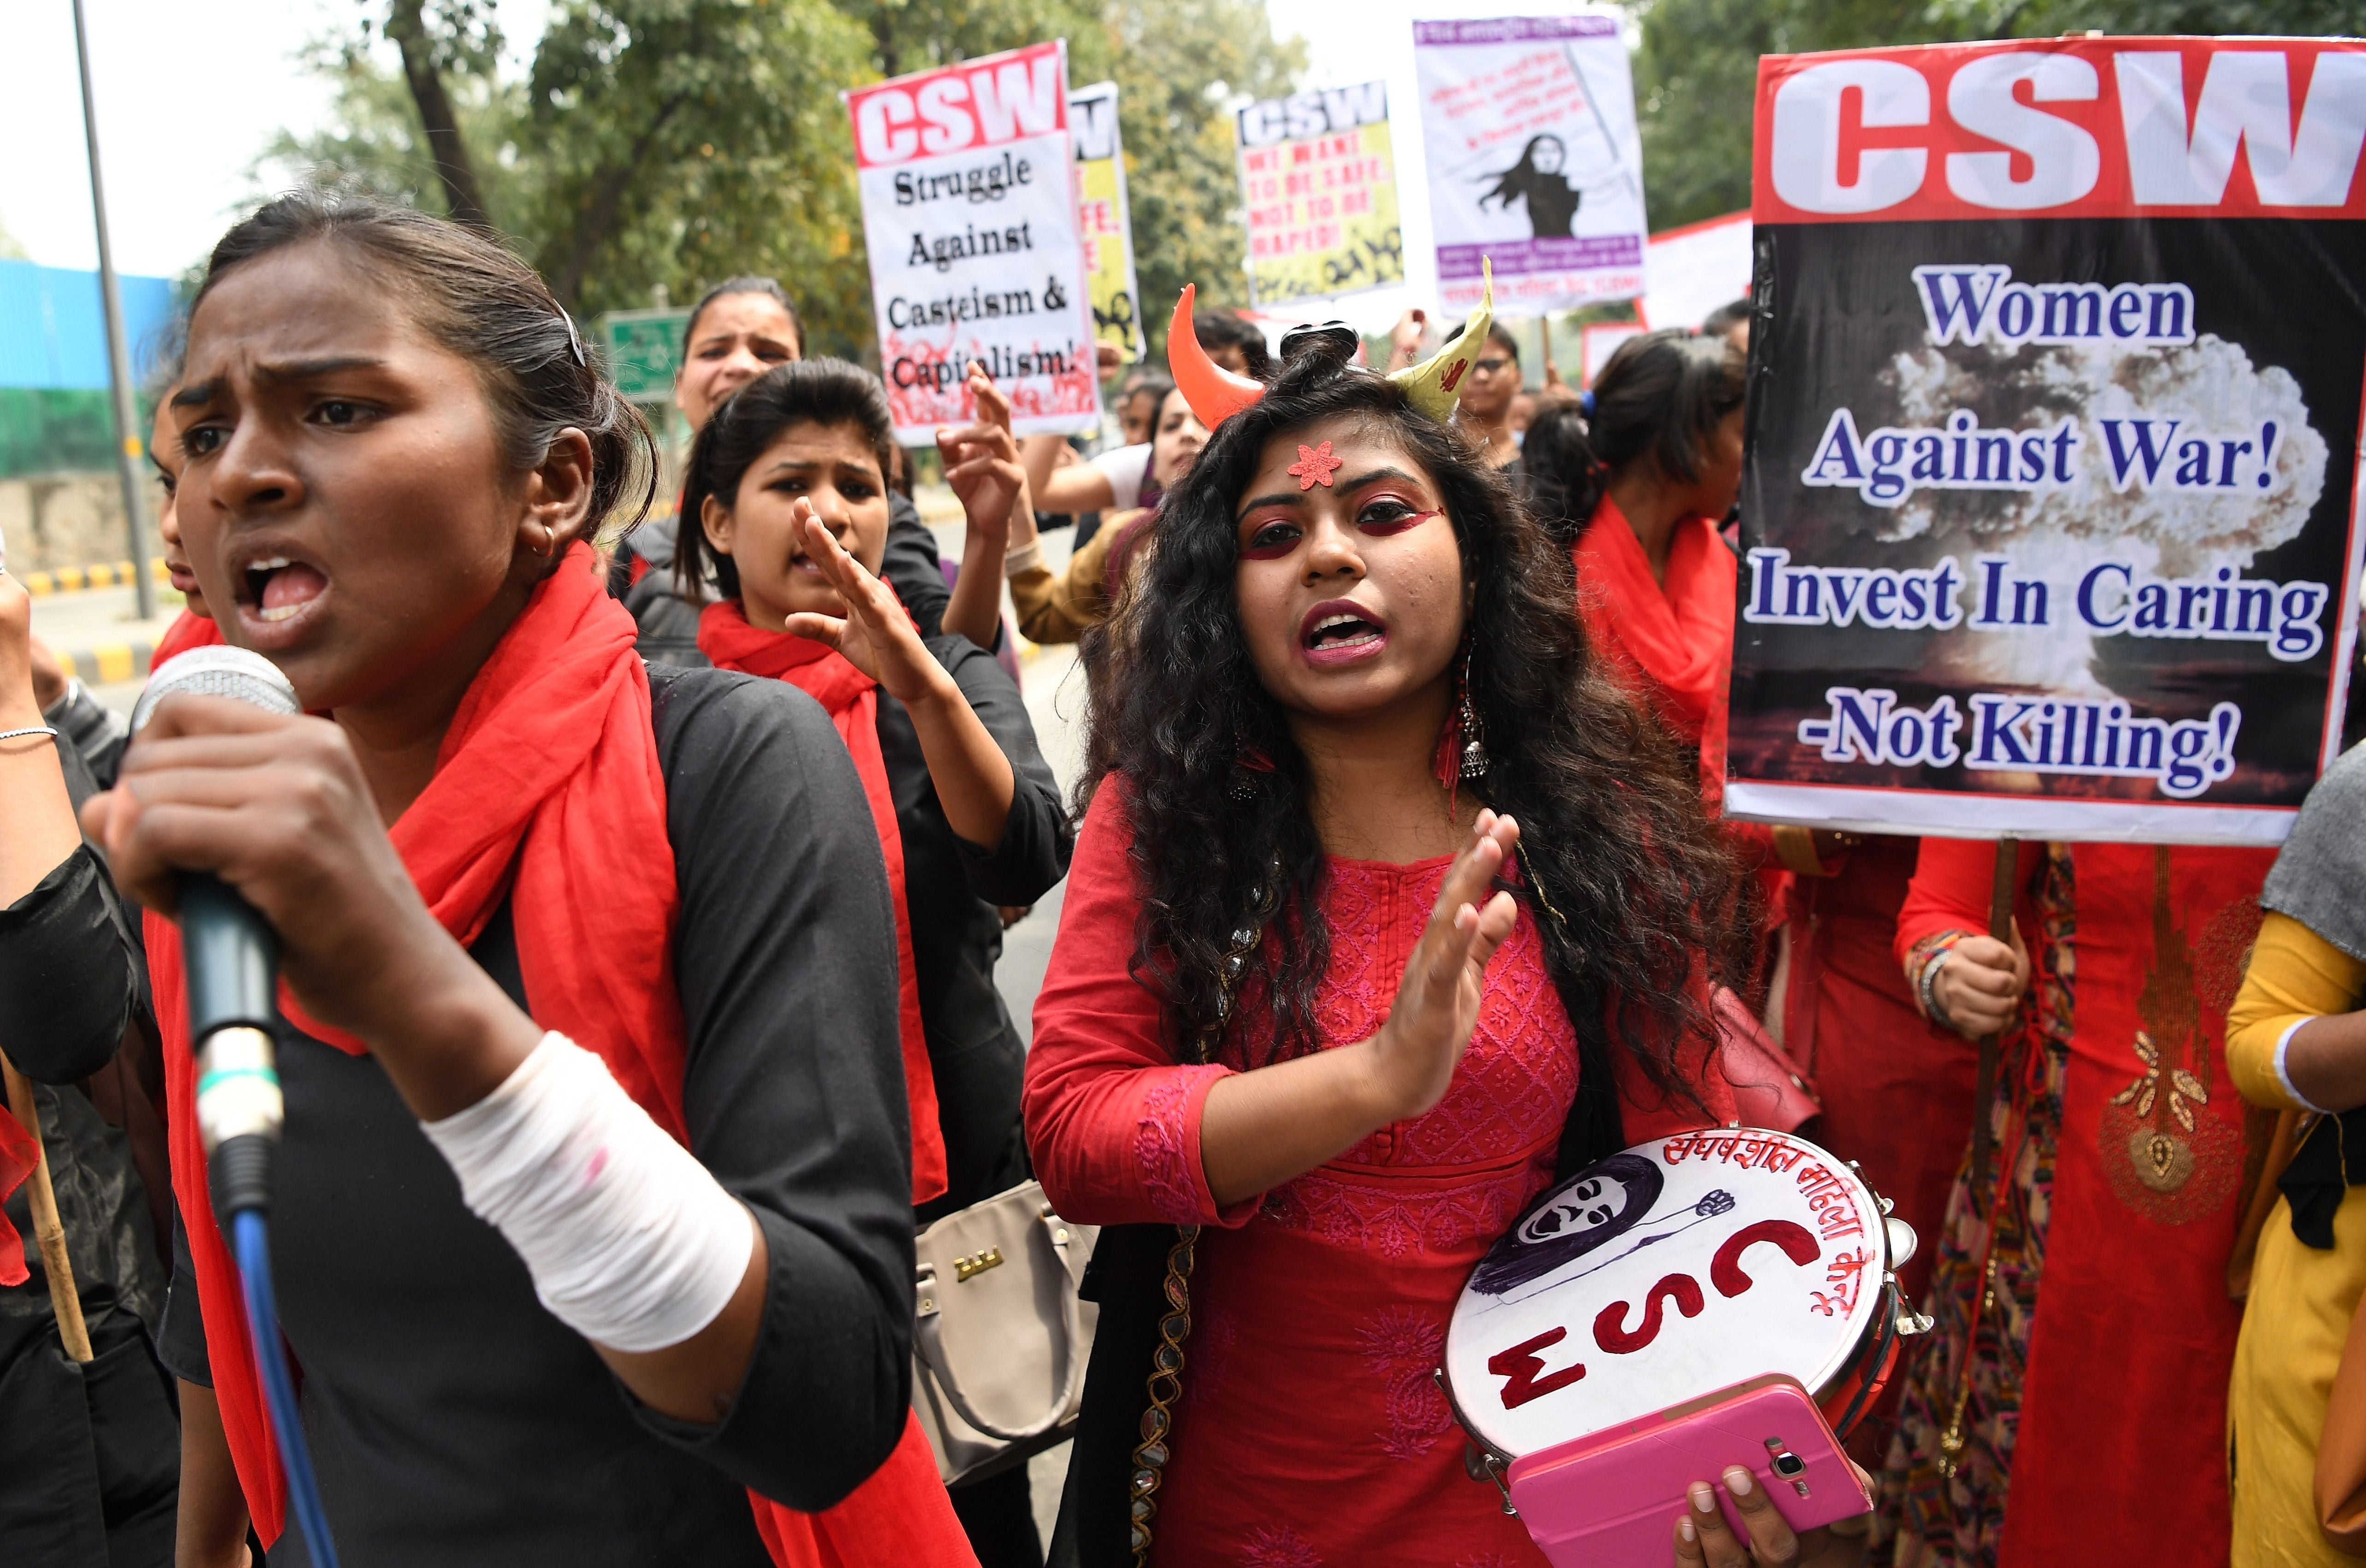 File Image: Indian women shout slogans at a march to mark International Women’s Day in New Delhi on March 8, 2019